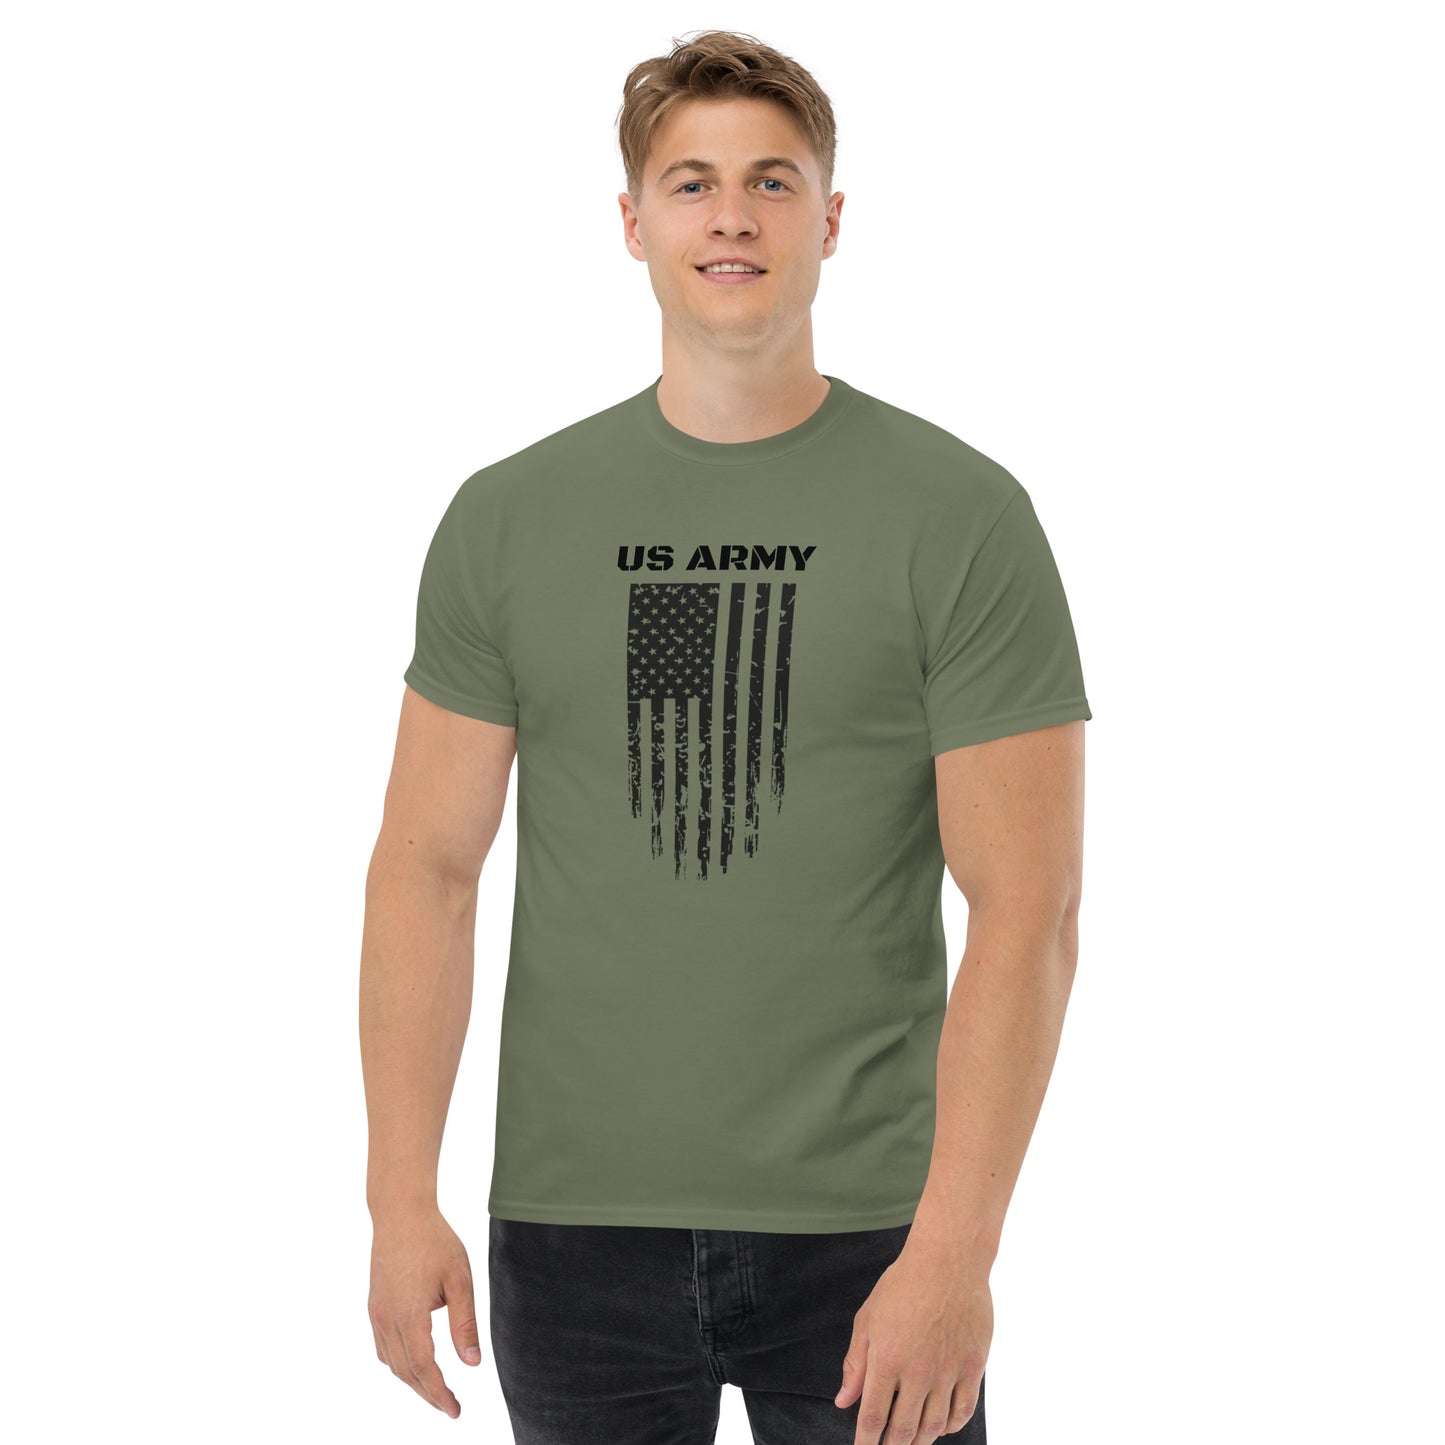 Honor Bound Gear "US Army" Men's T-shirt